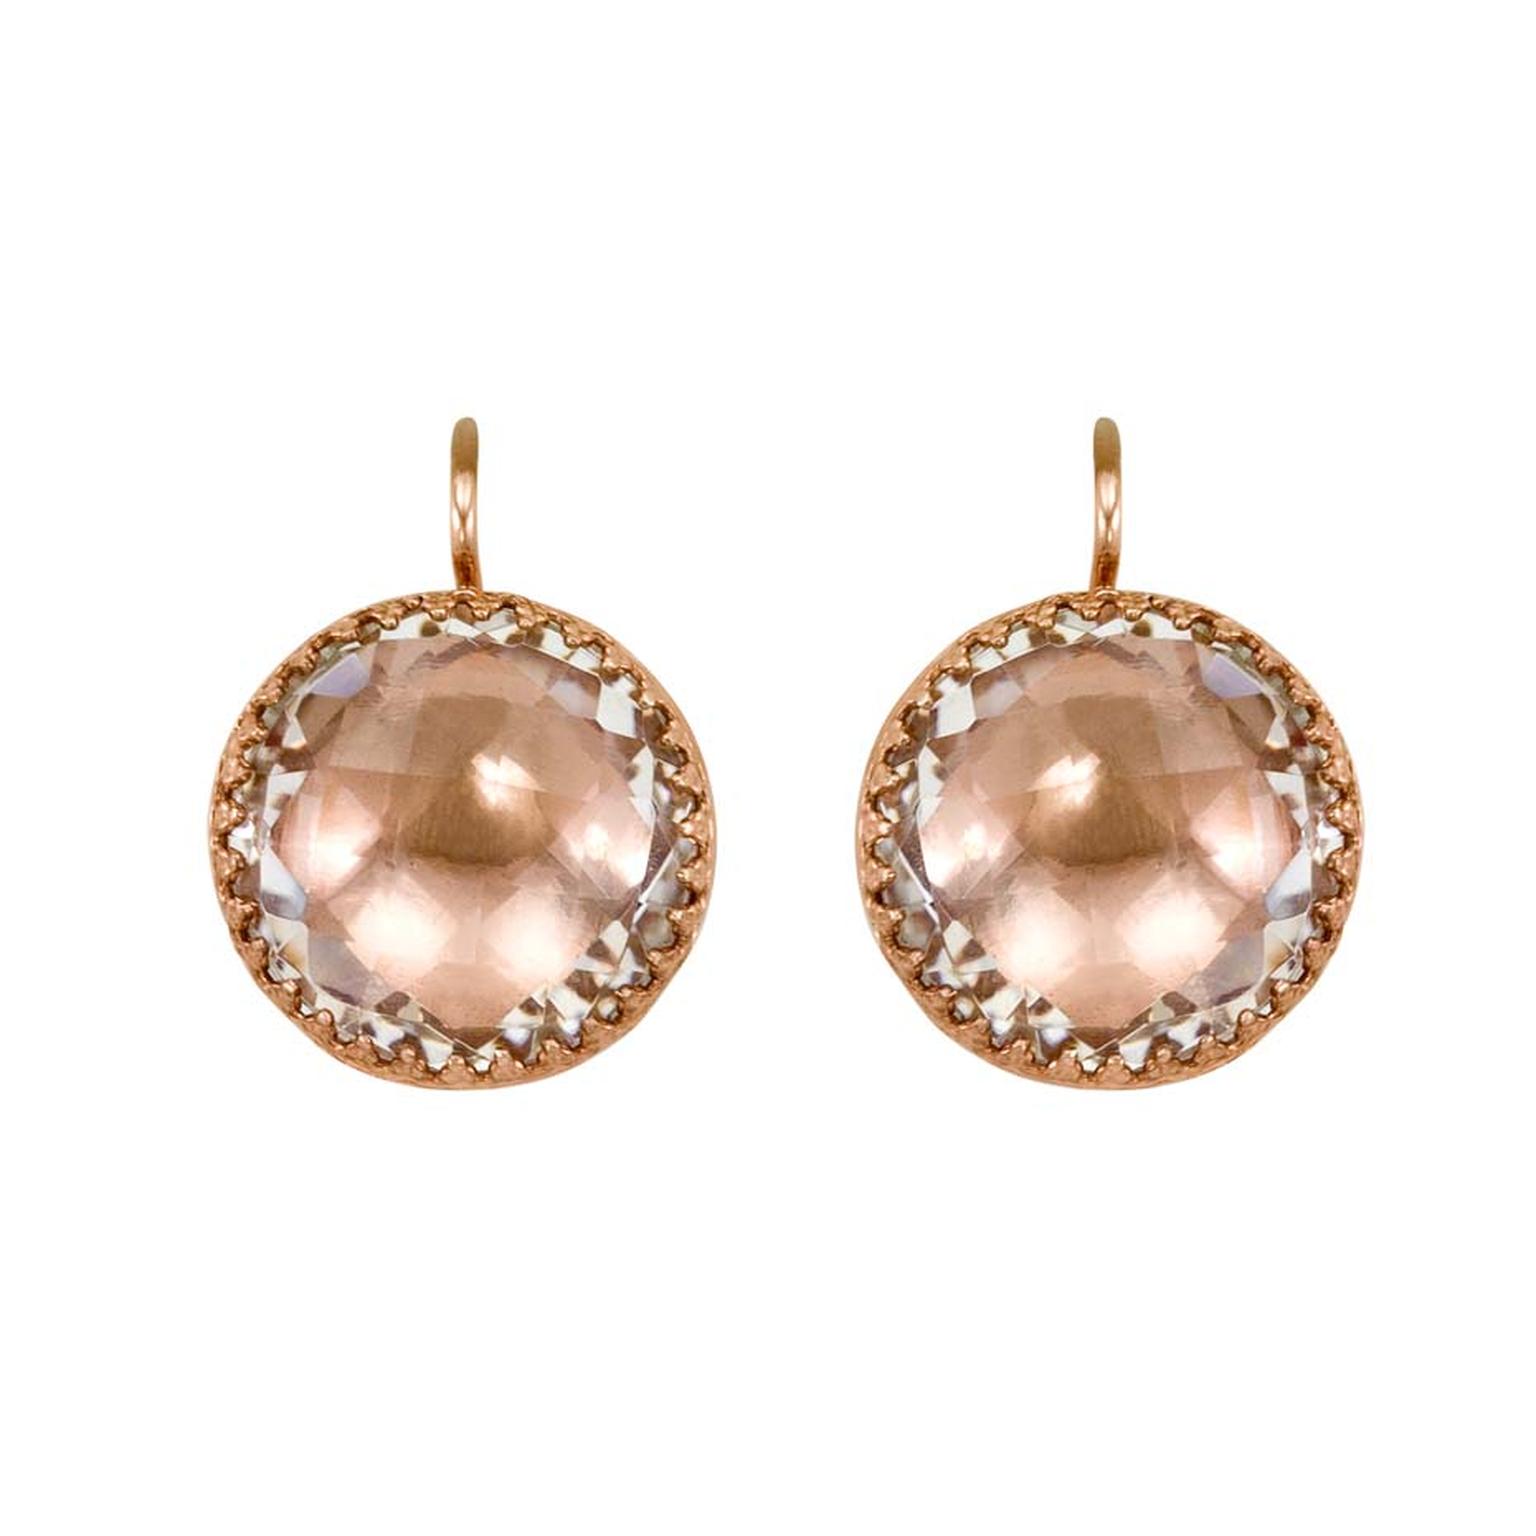 Larkspur & Hawk Olivia Button white topaz earrings in rose gold-washed sterling silver and copper foil ($1,100).